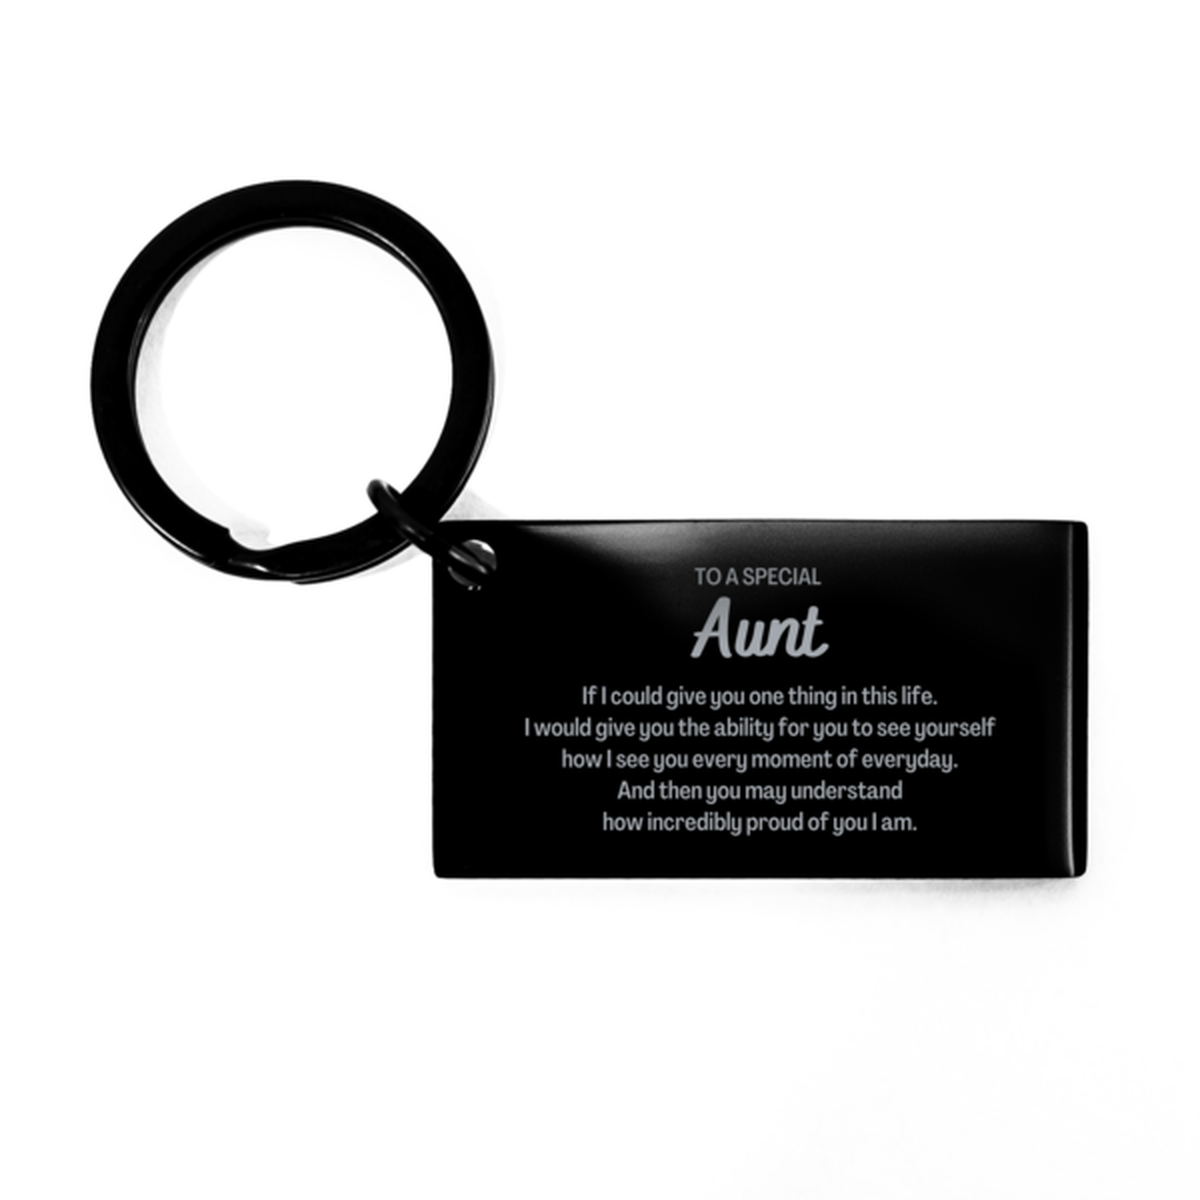 To My Aunt Keychain, Gifts For Aunt Engraved, Inspirational Gifts for Christmas Birthday, Epic Gifts for Aunt To A Special Aunt how incredibly proud of you I am